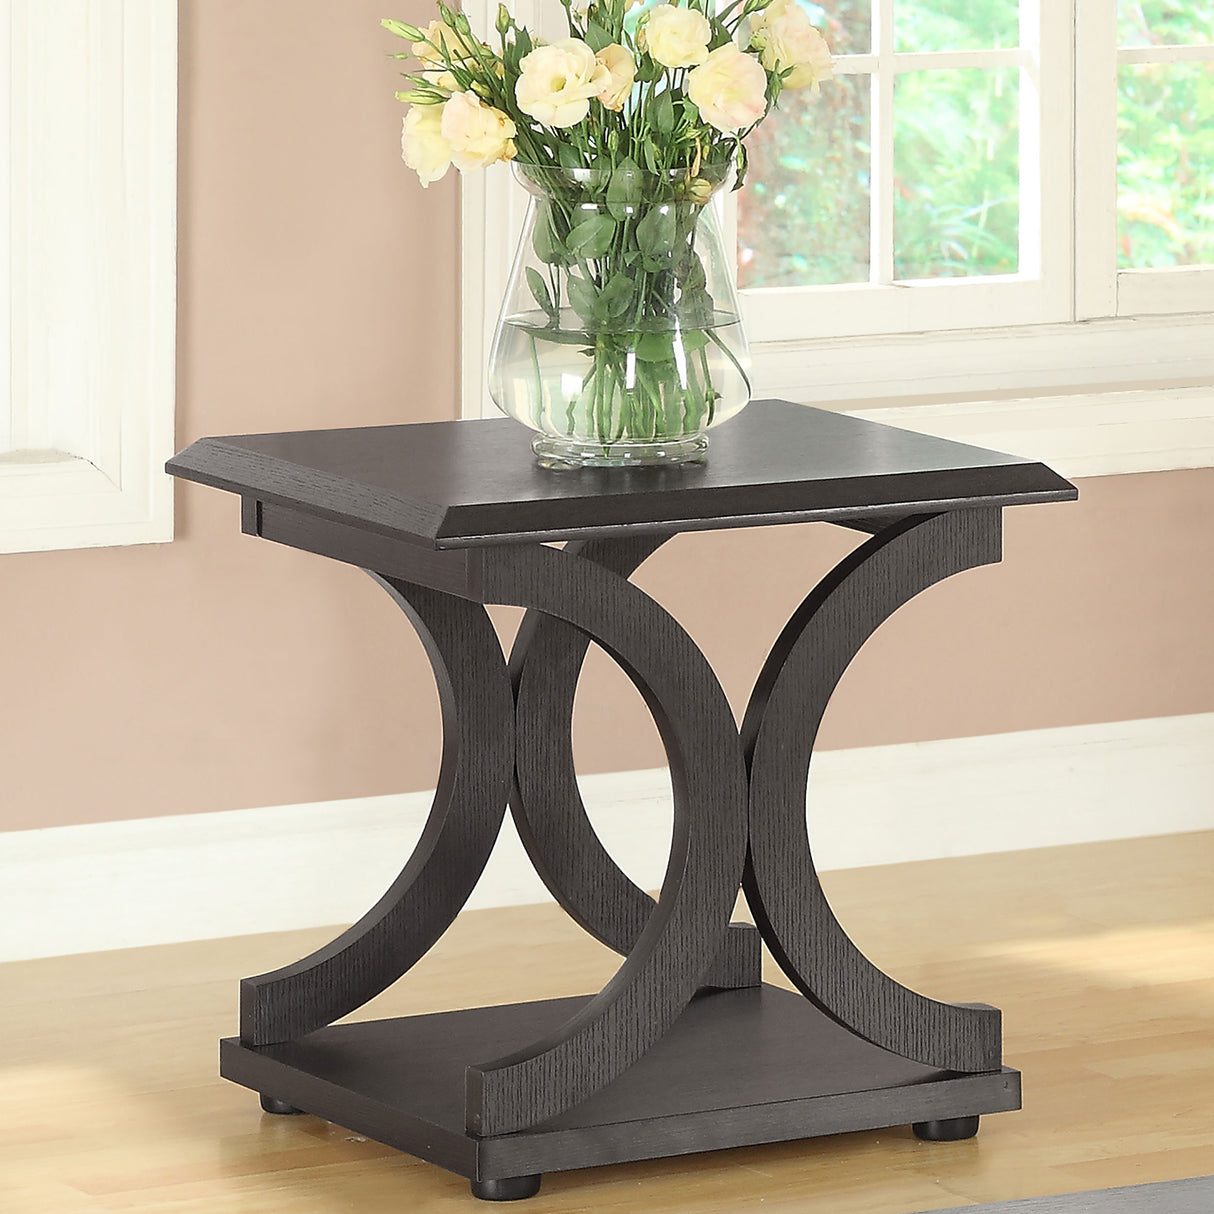 End Table - Shelly C-shaped Base End Table Cappuccino